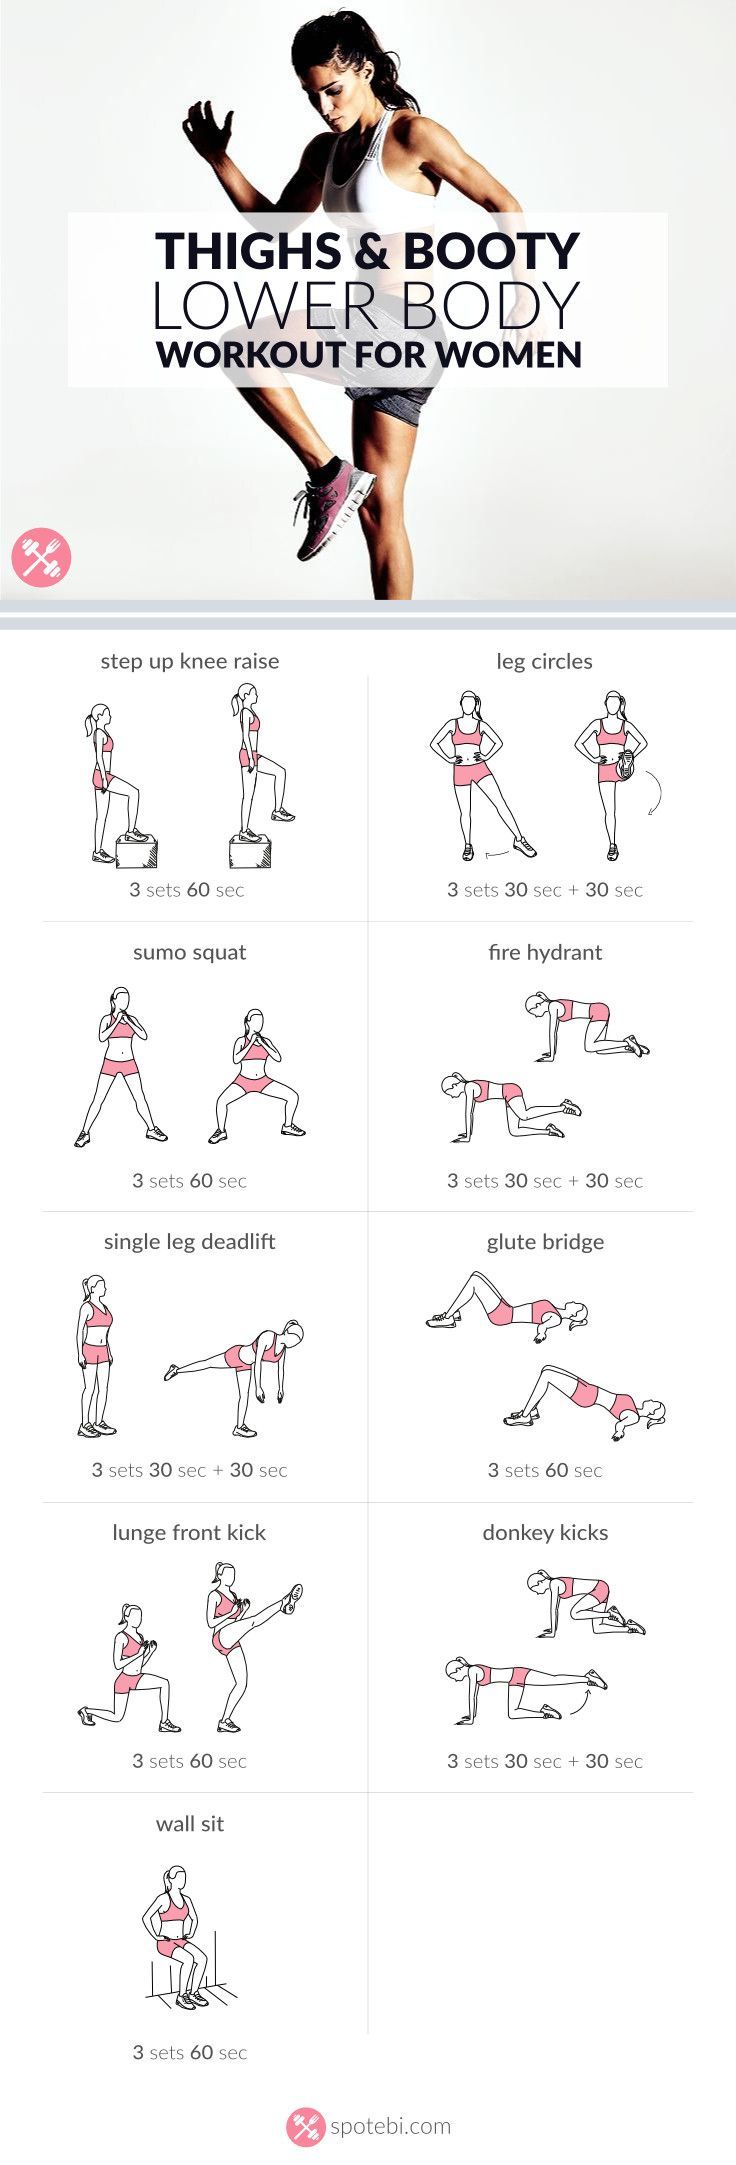 Sculpt your glutes, hips, hamstrings, quads and calves with this lower body workout. A routine designed to give you slim thighs, a